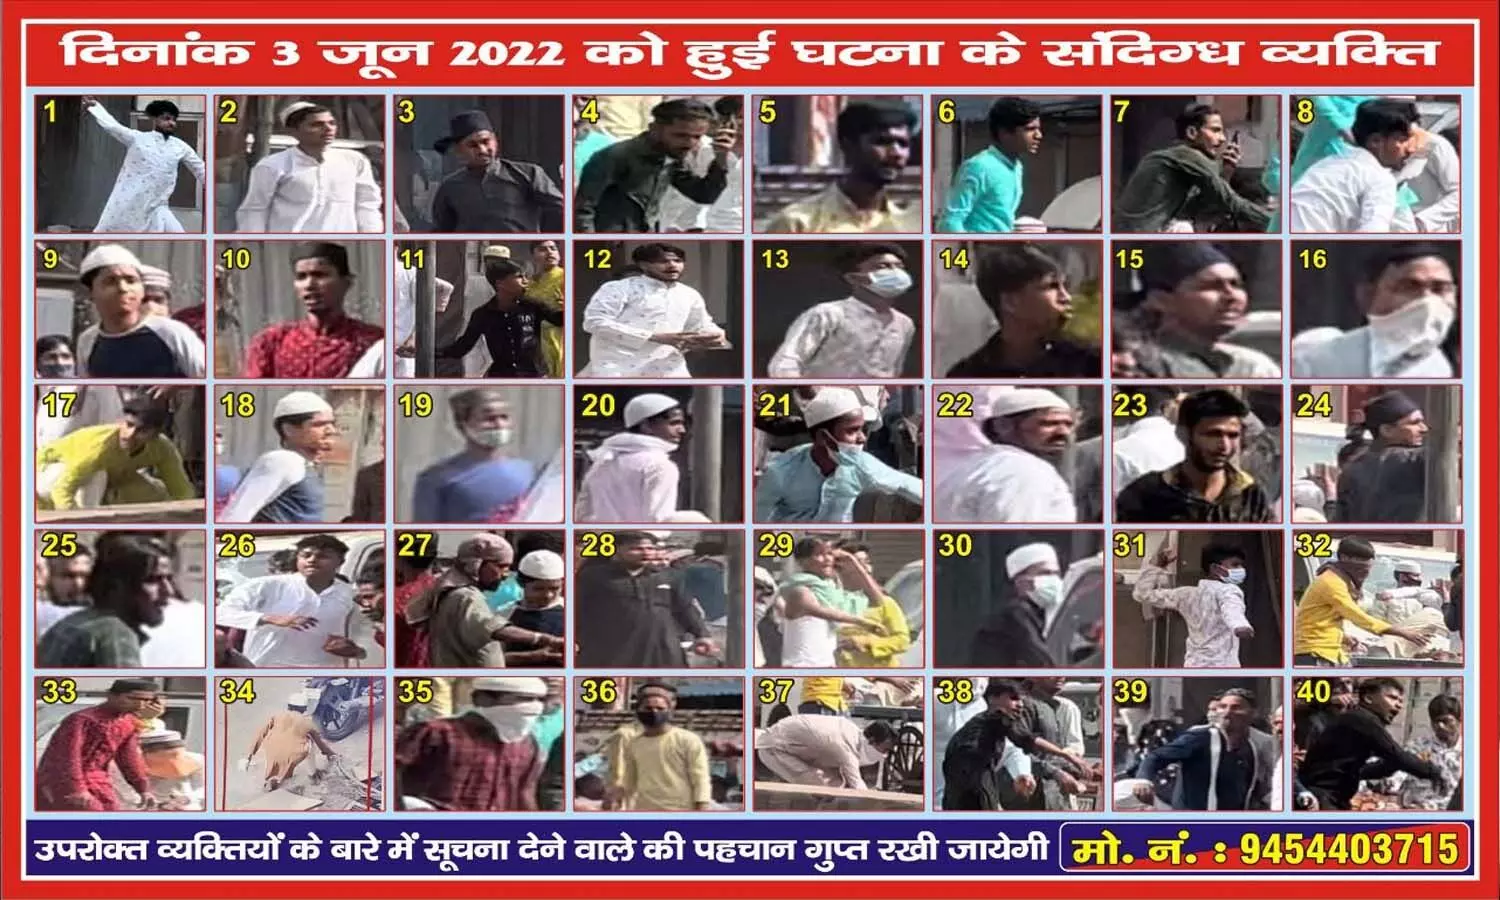 Kanpur Violence Case: Police issued posters of 40 miscreants, 38 arrested so far